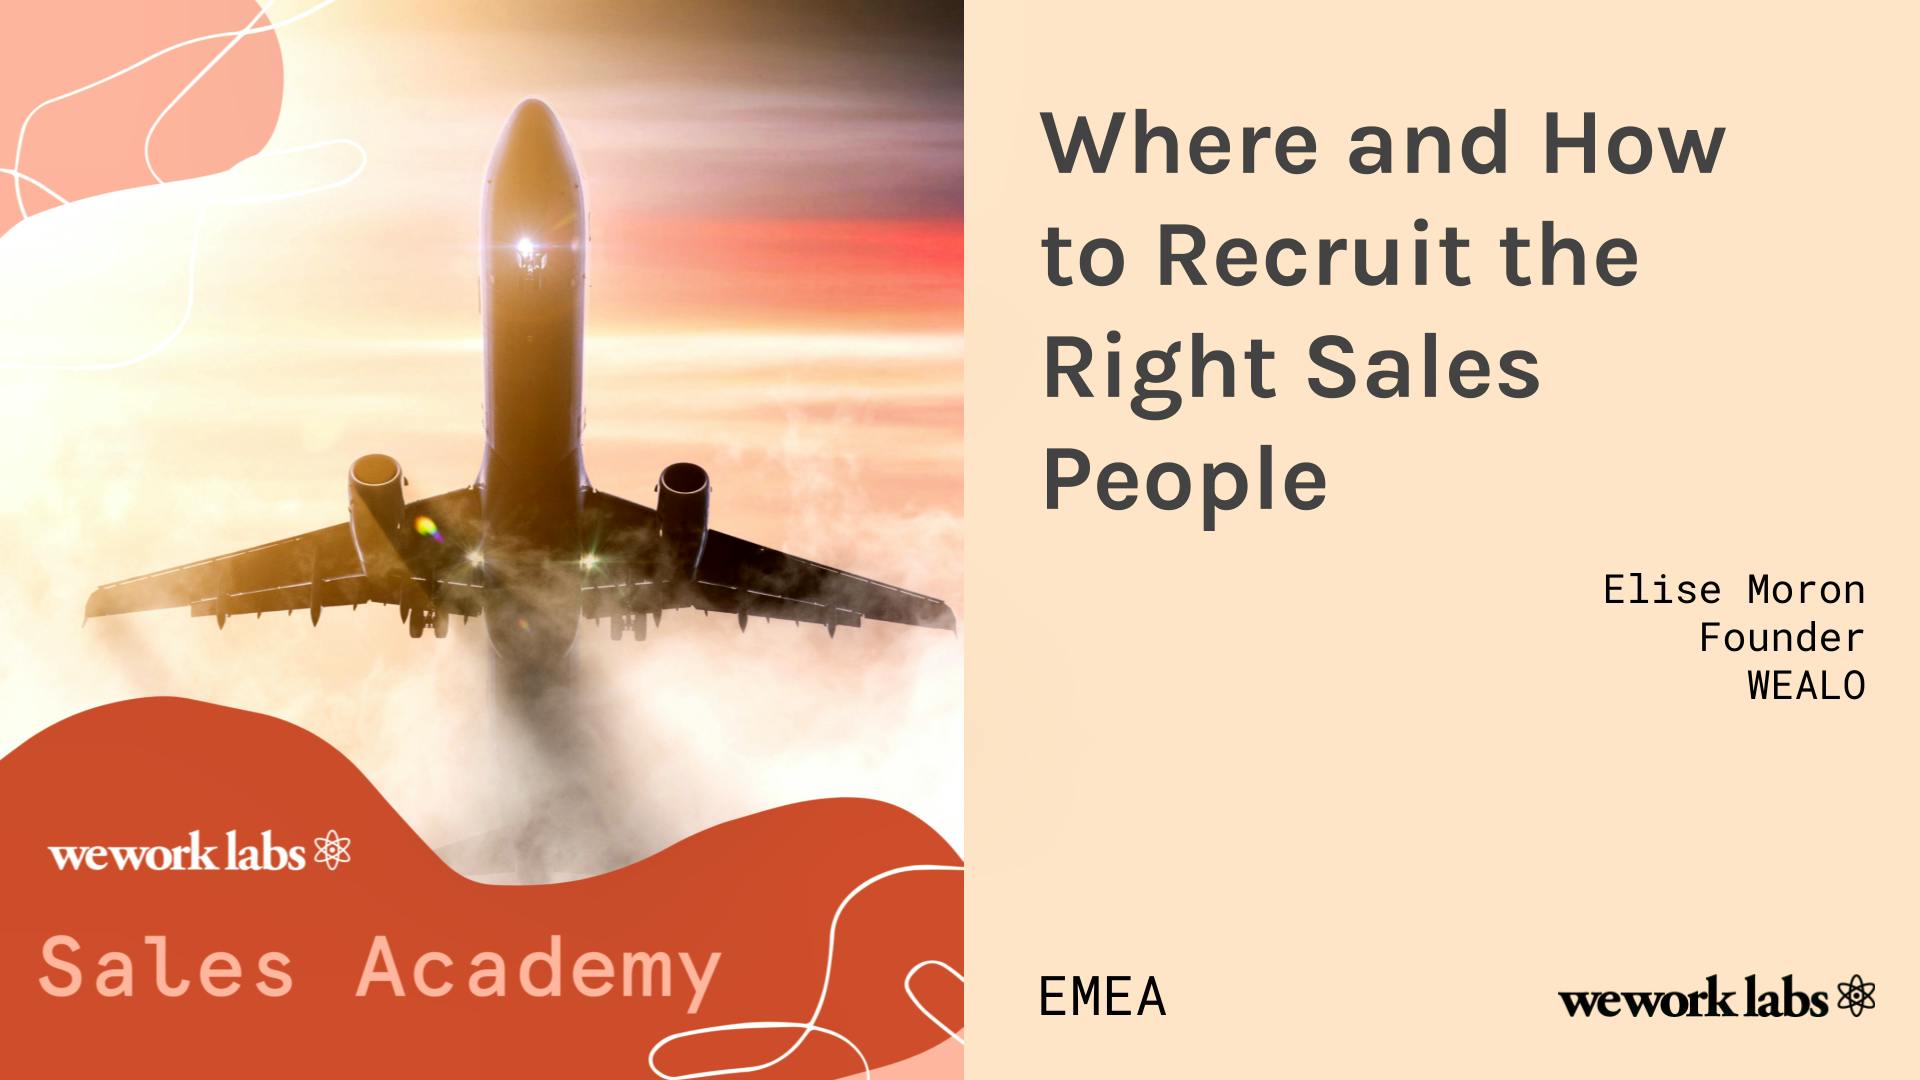 Sales Academy (EMEA): Where and How to Recruit the Right Sales People